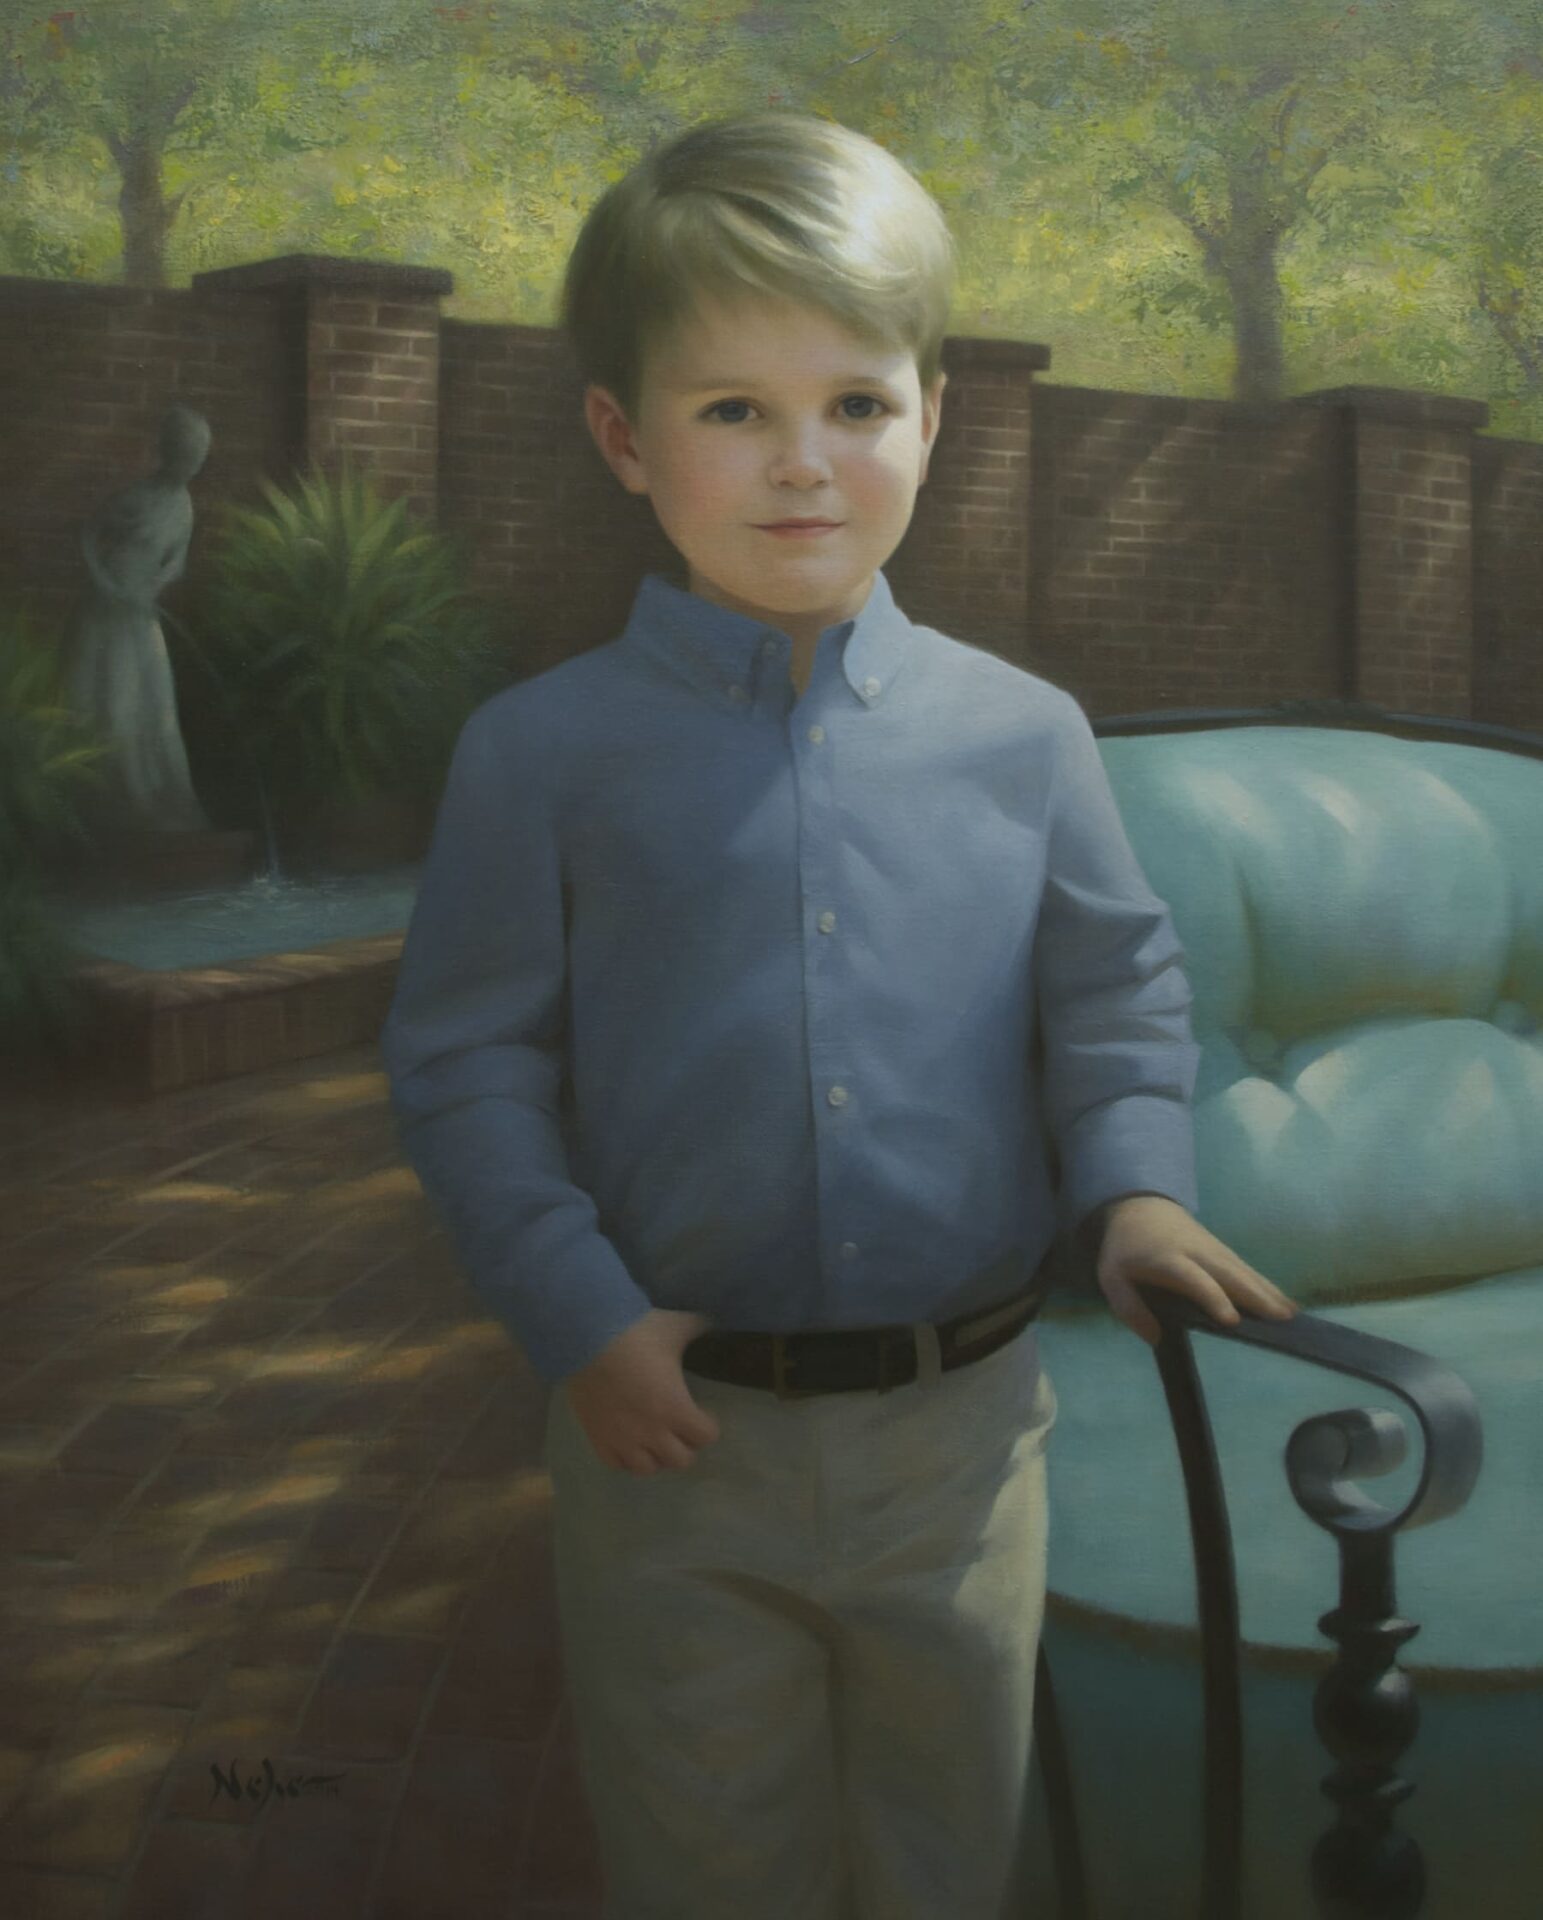 A young boy’s portrait painting